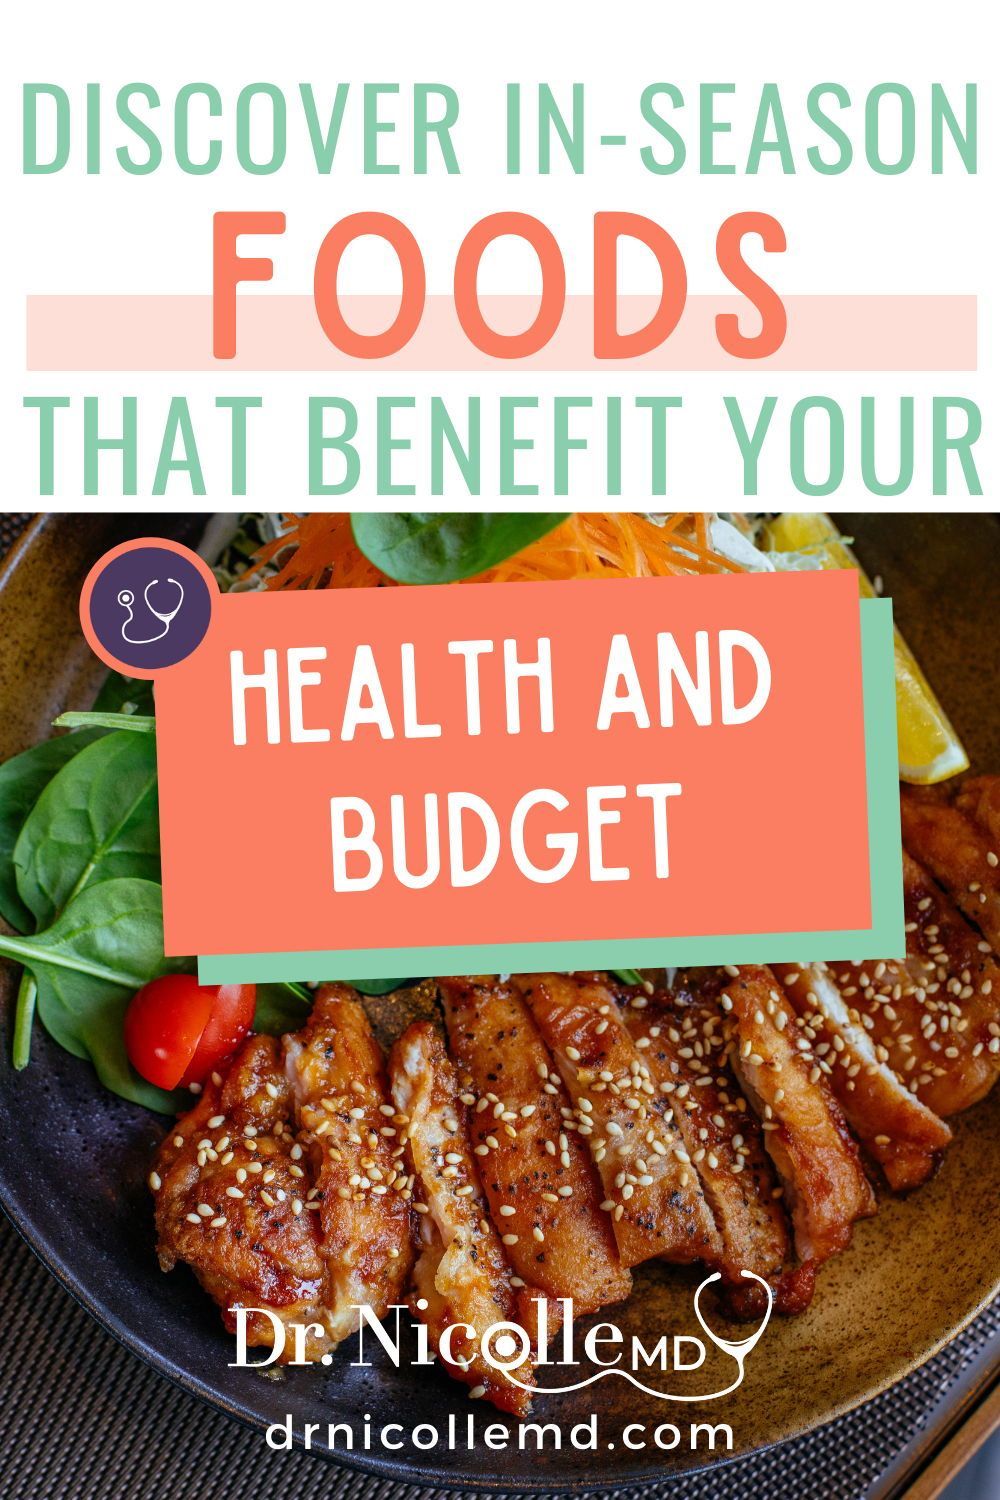 , Discover In-Season Foods That Benefit Your Health and Budget, Dr. Nicolle